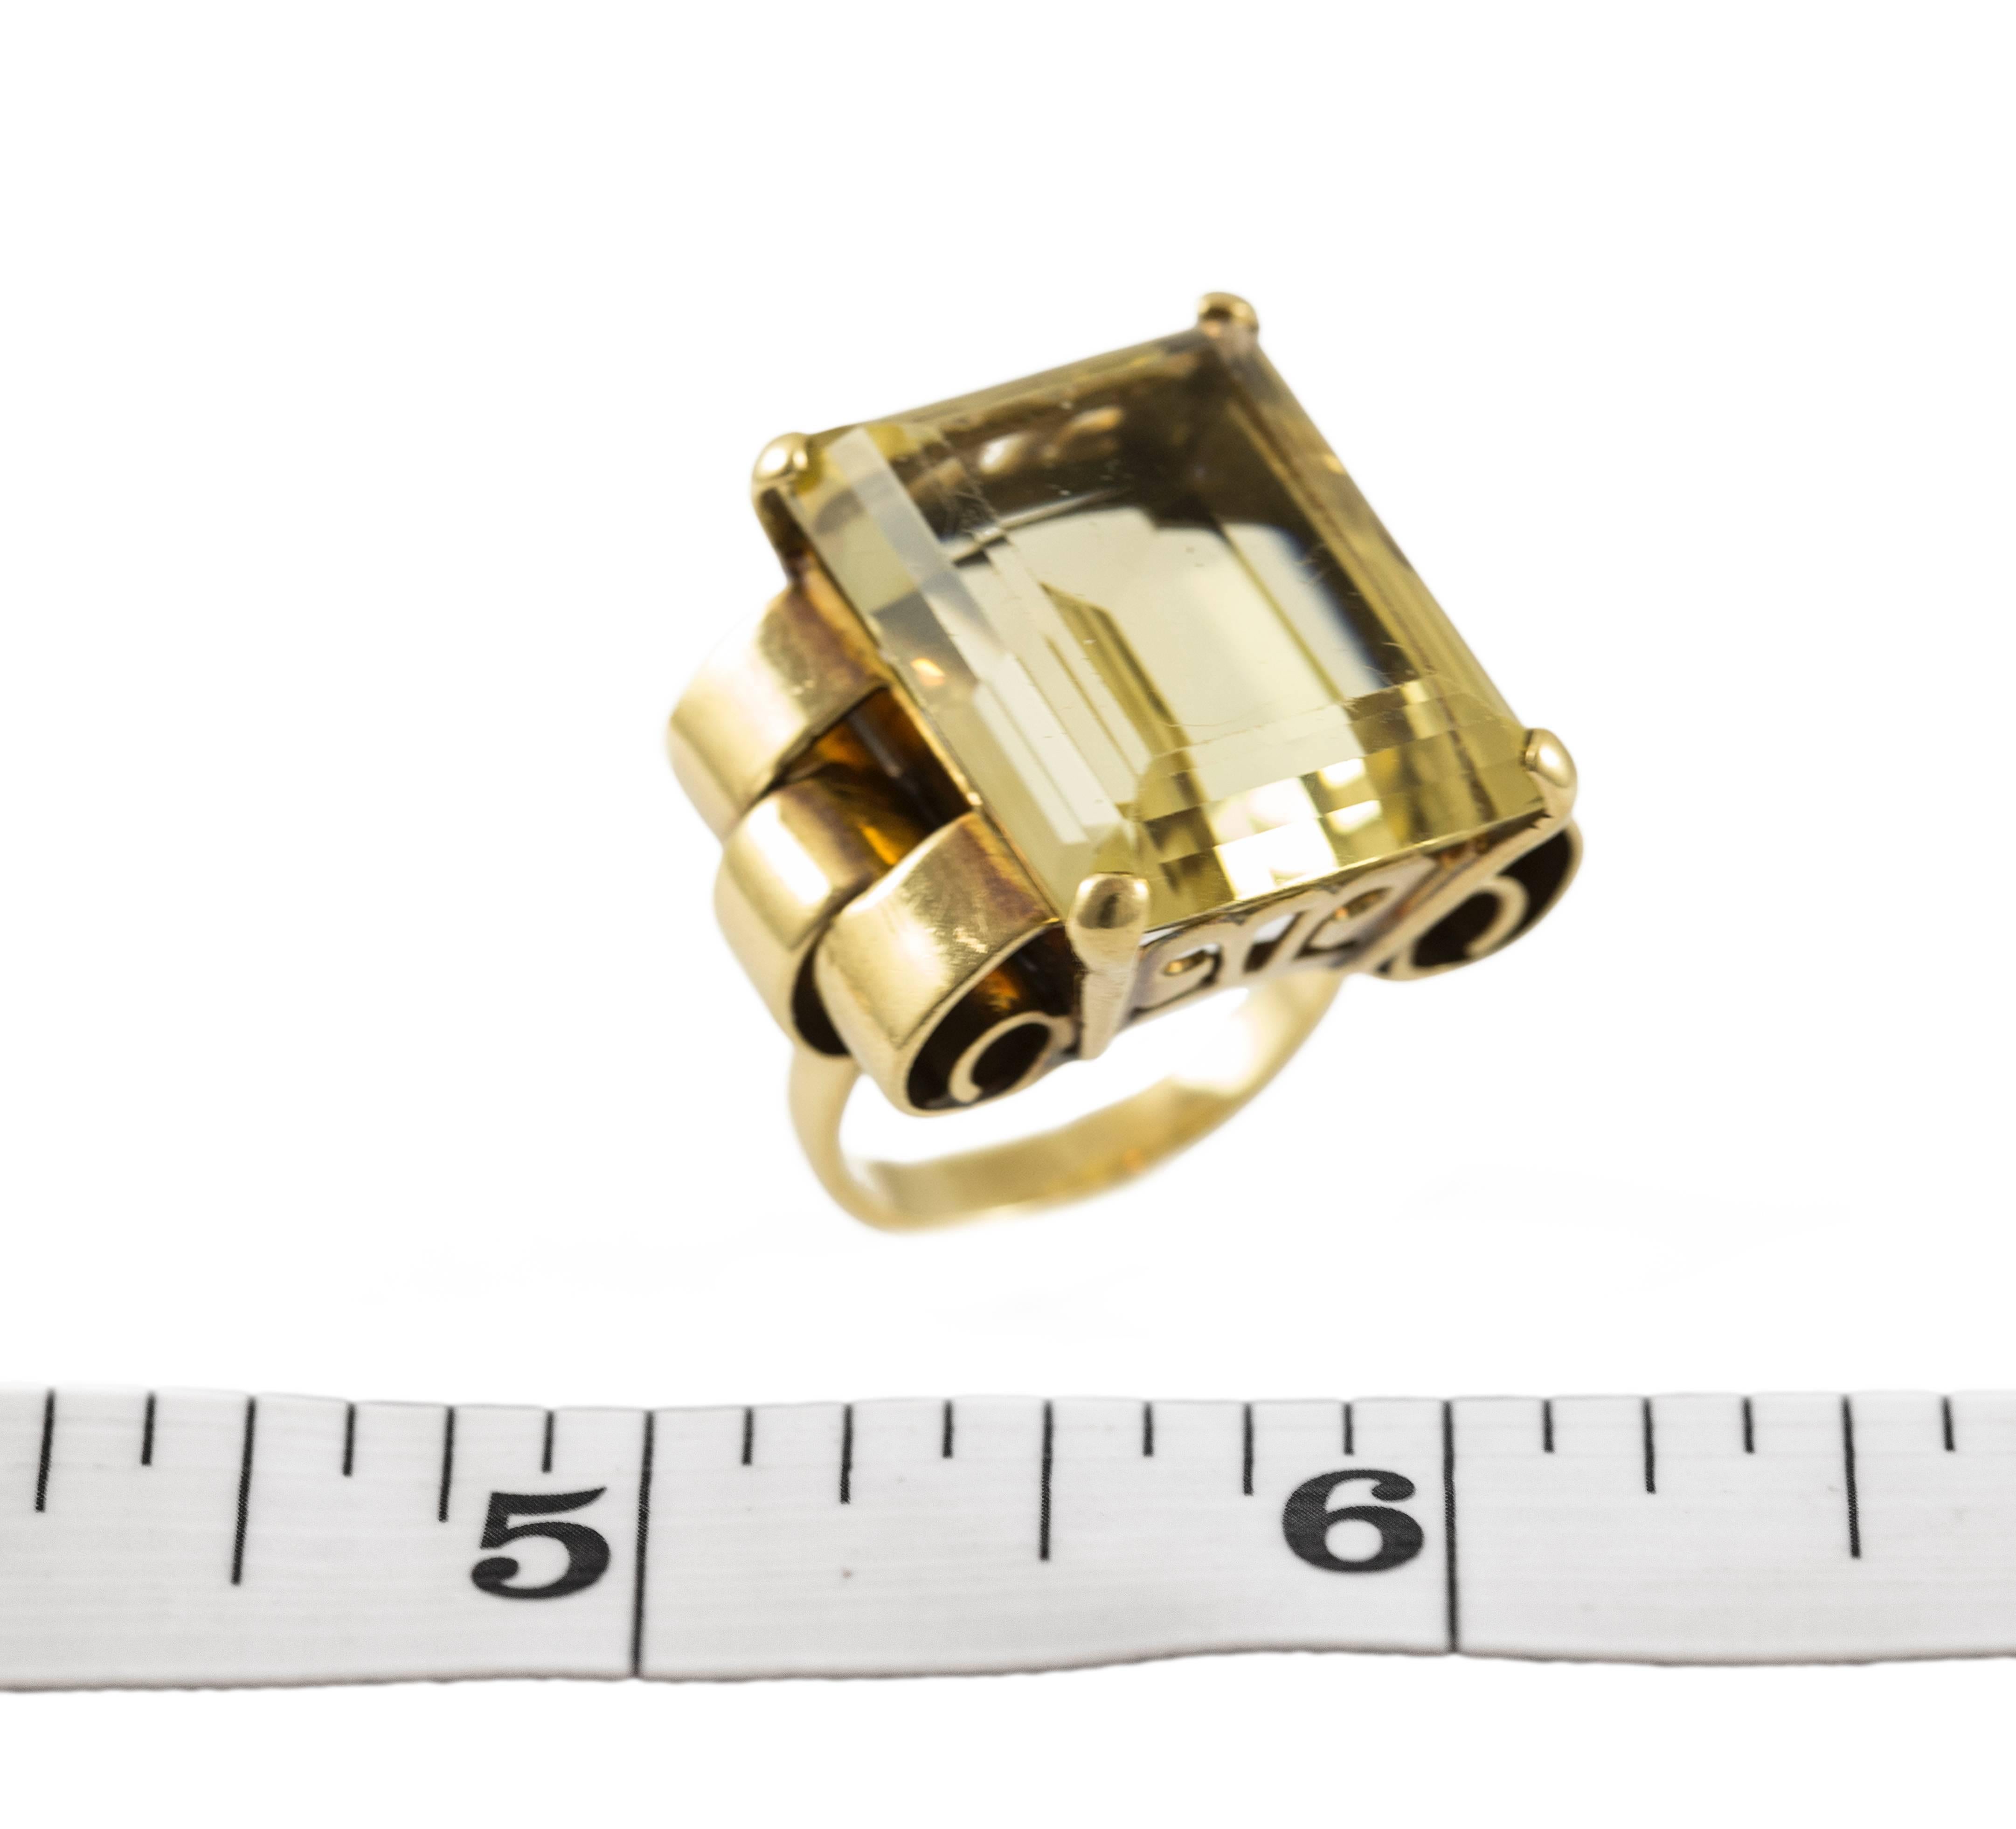 Large Hand Made Retro Lemon Quartz Gold Ring In Excellent Condition For Sale In Toronto, Ontario